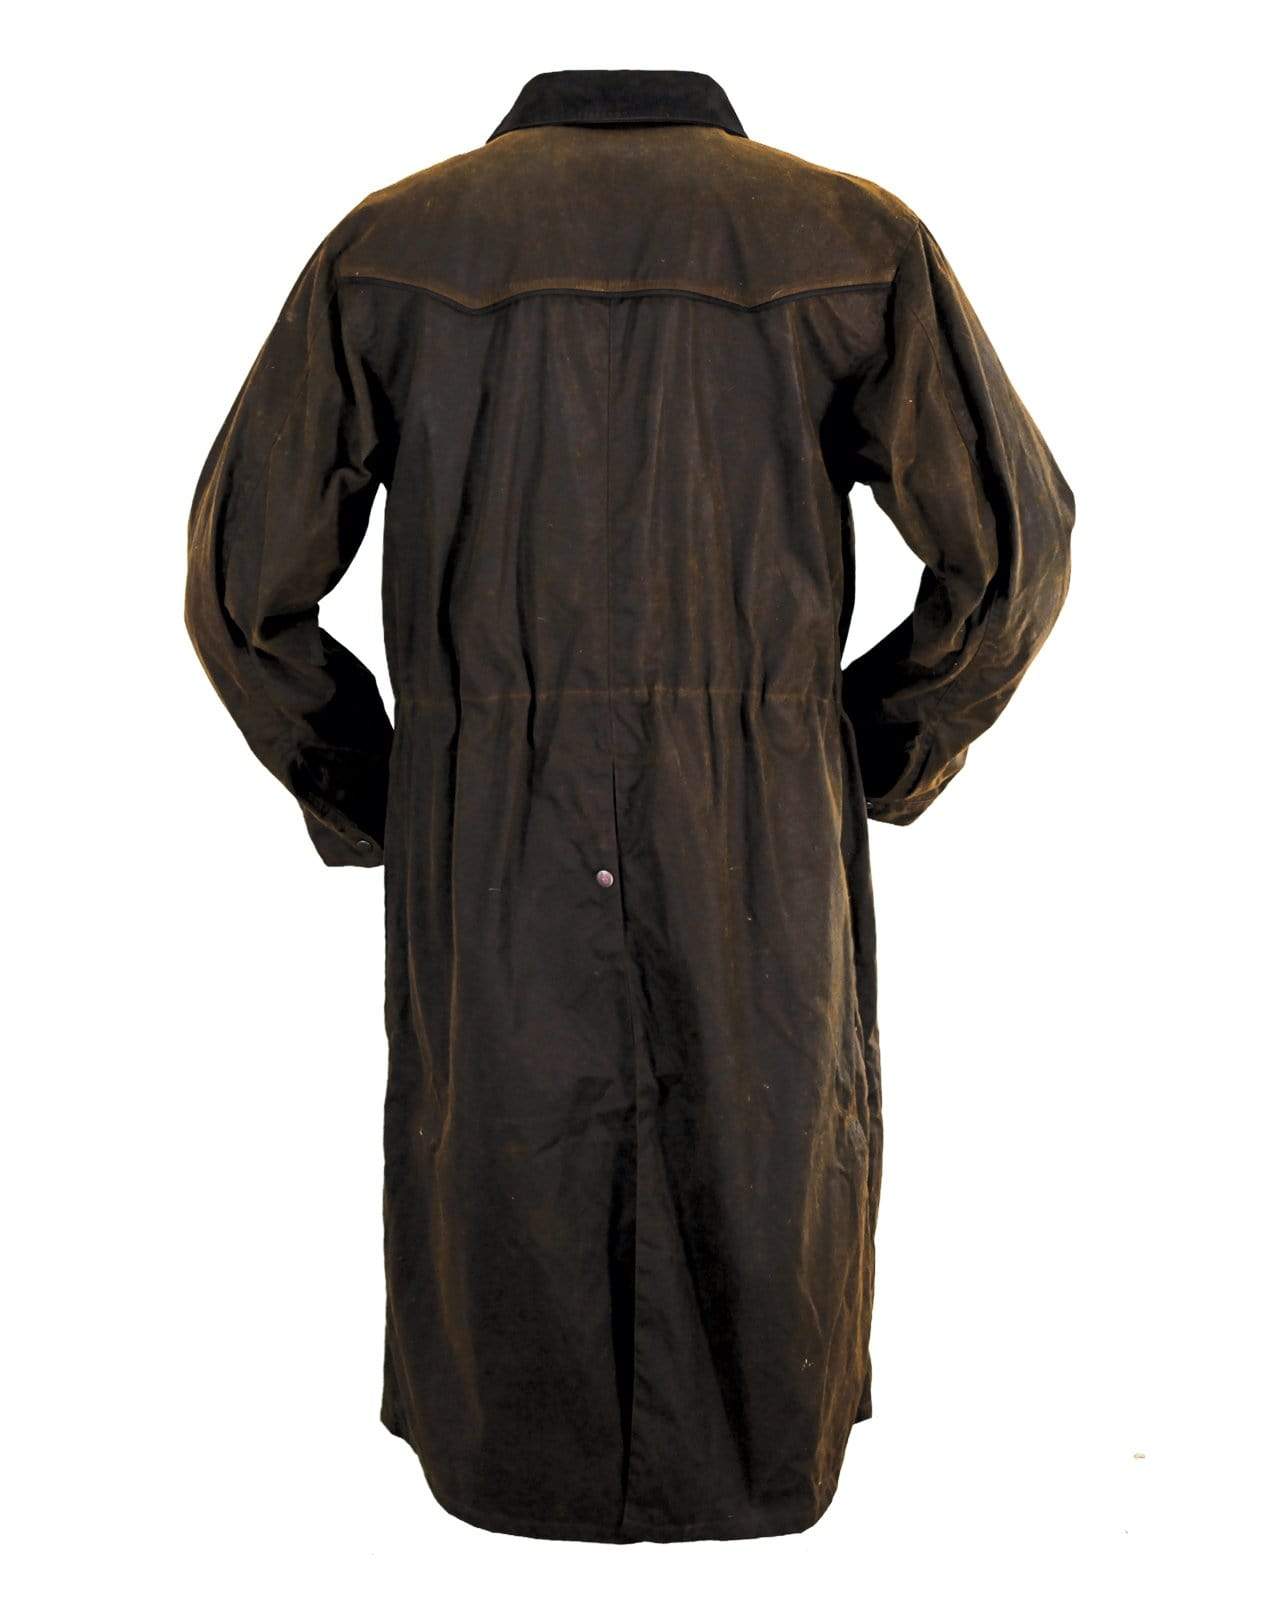 Pathfinder Oilskin Duster Coat  Duster Coats by Outback Trading